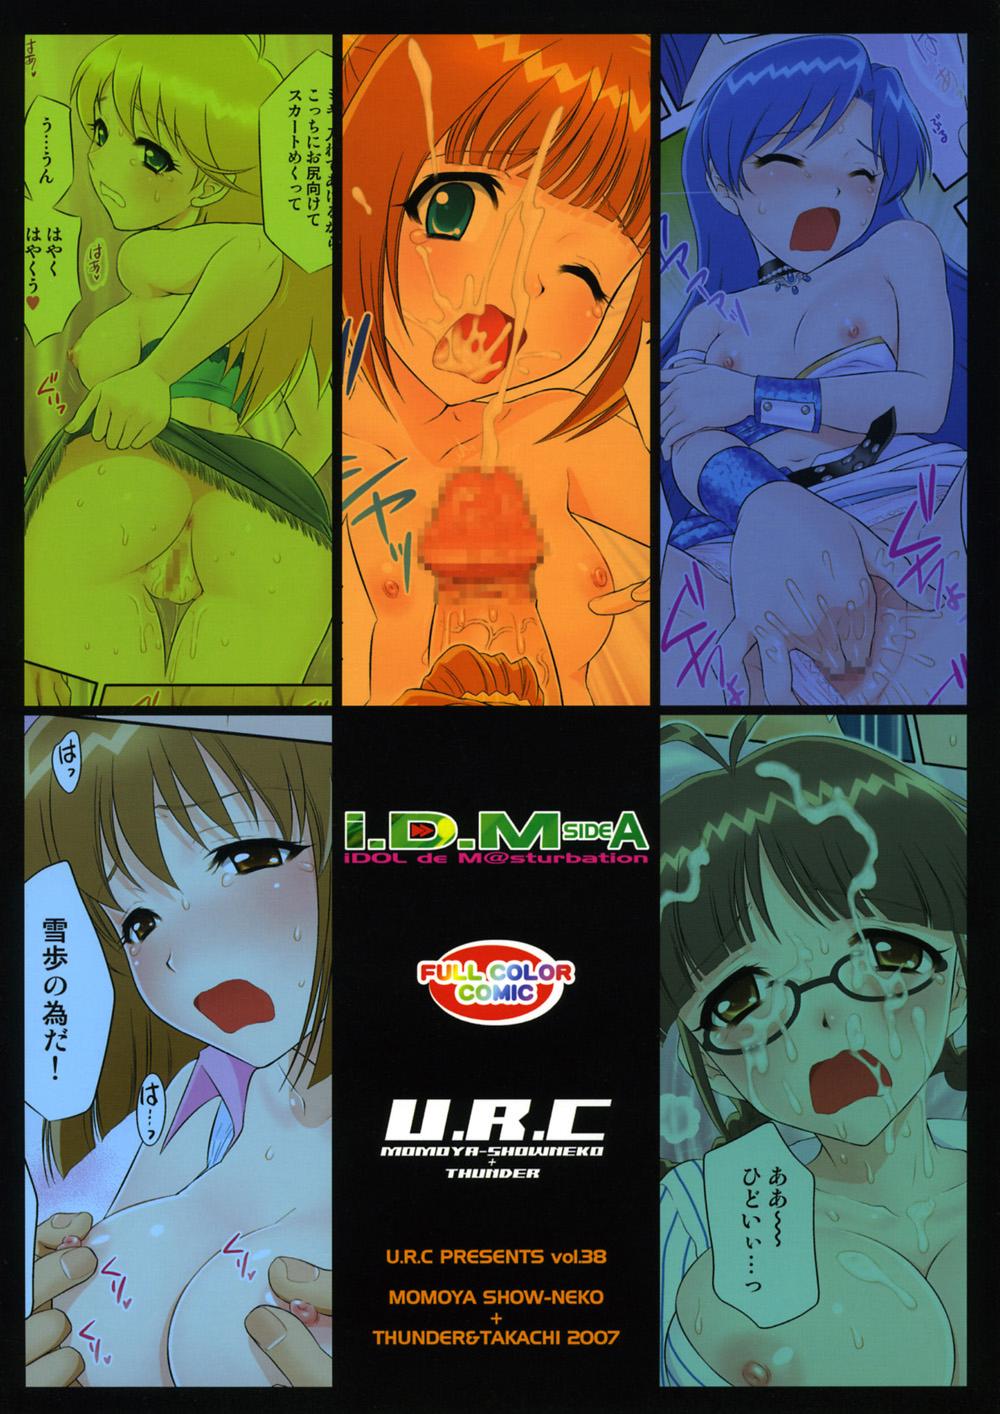 Dyke i.D.M SIDE A - The idolmaster Missionary - Page 26